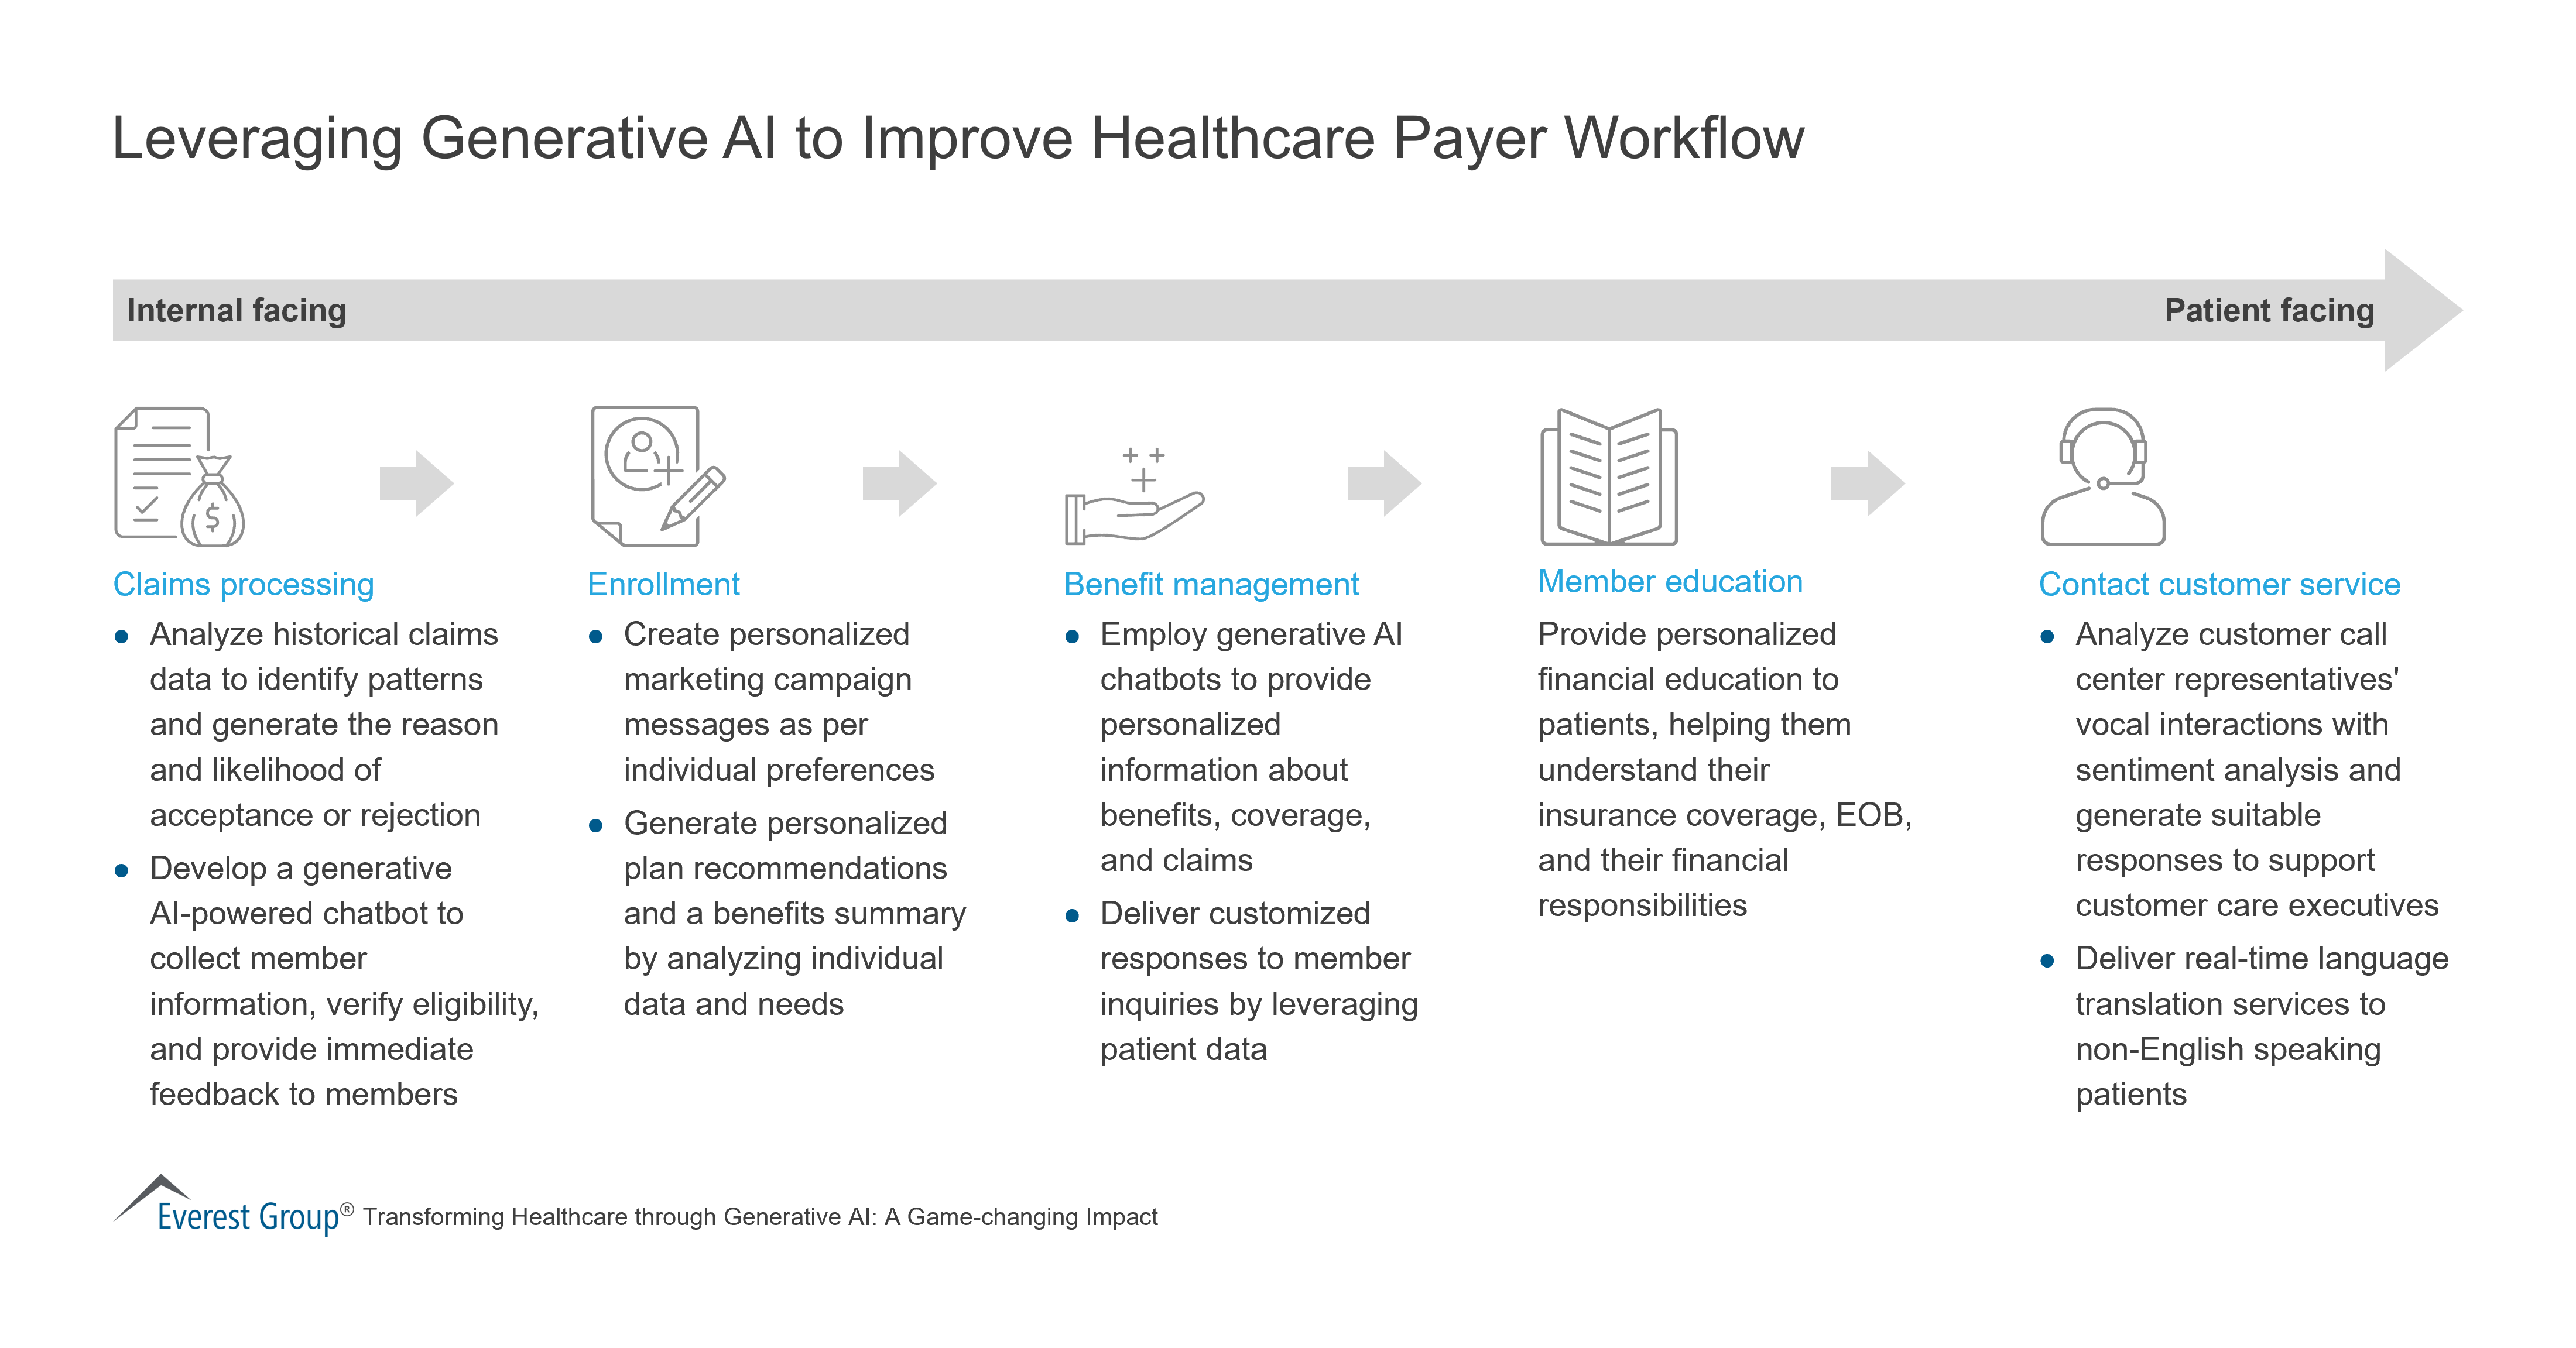 Leveraging Generative AI to Improve Healthcare Payer Workflow